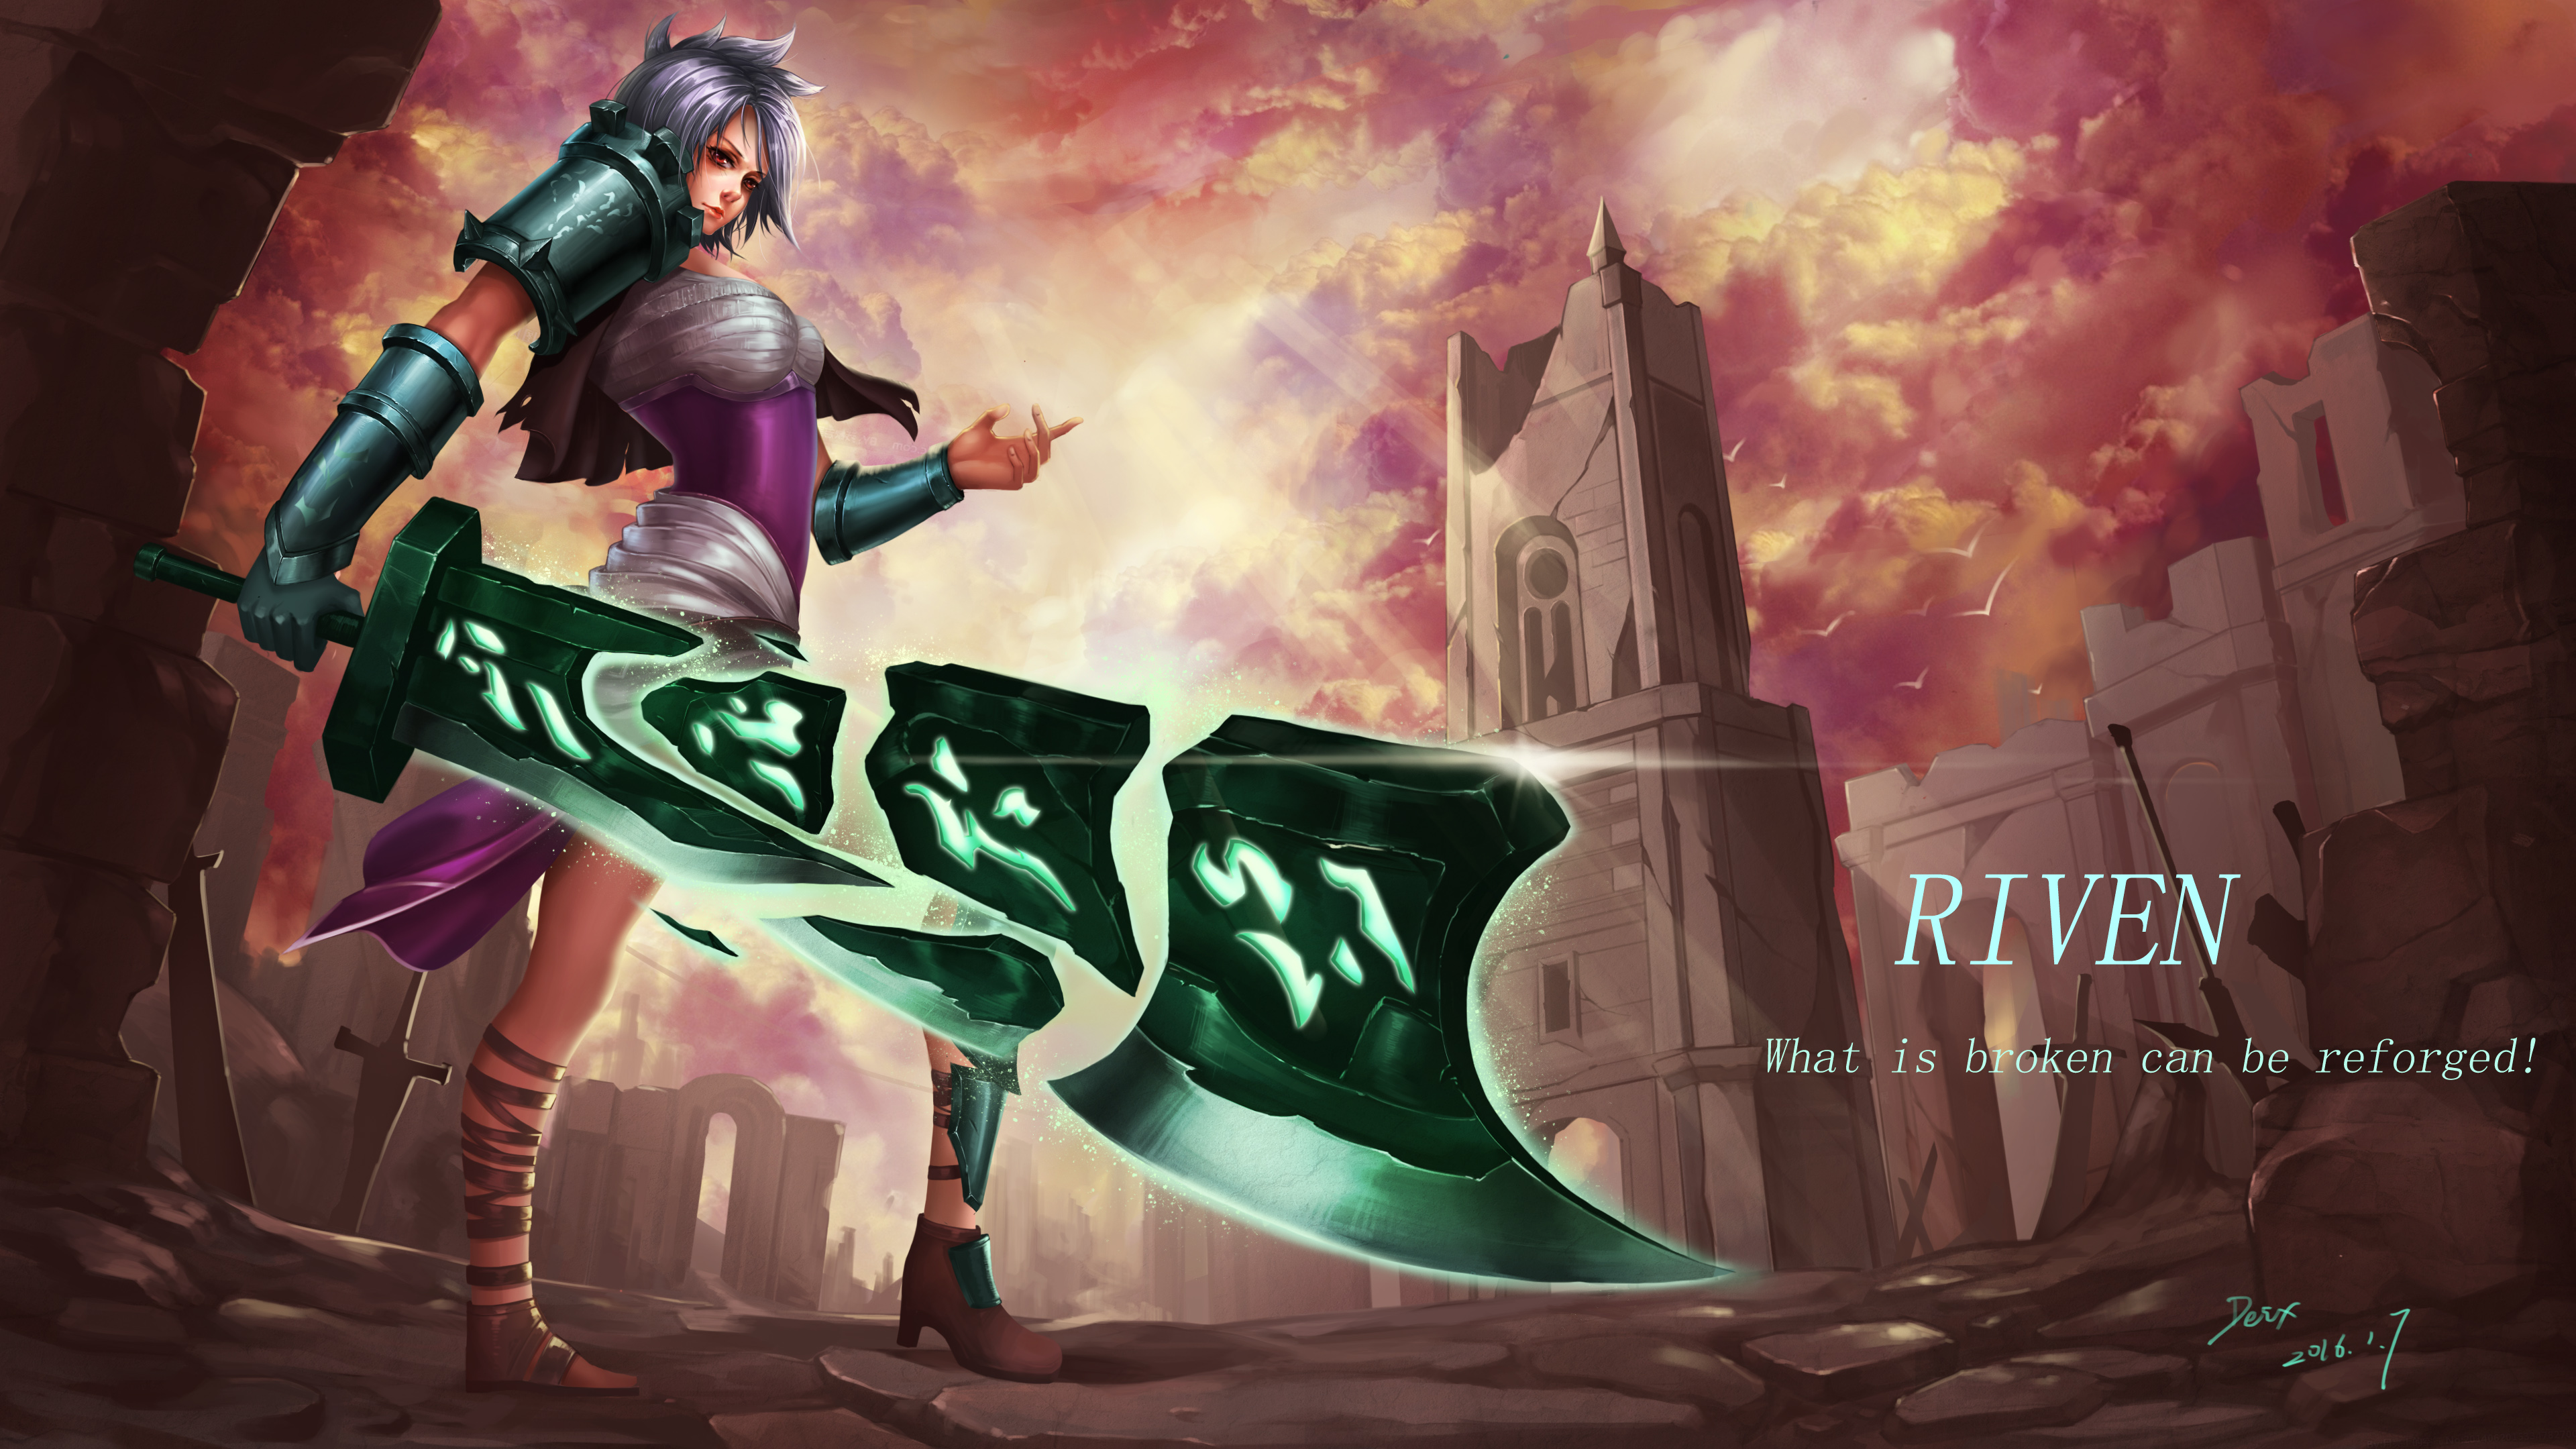 lol riven wallpaper,action adventure game,cg artwork,anime,fictional character,graphic design